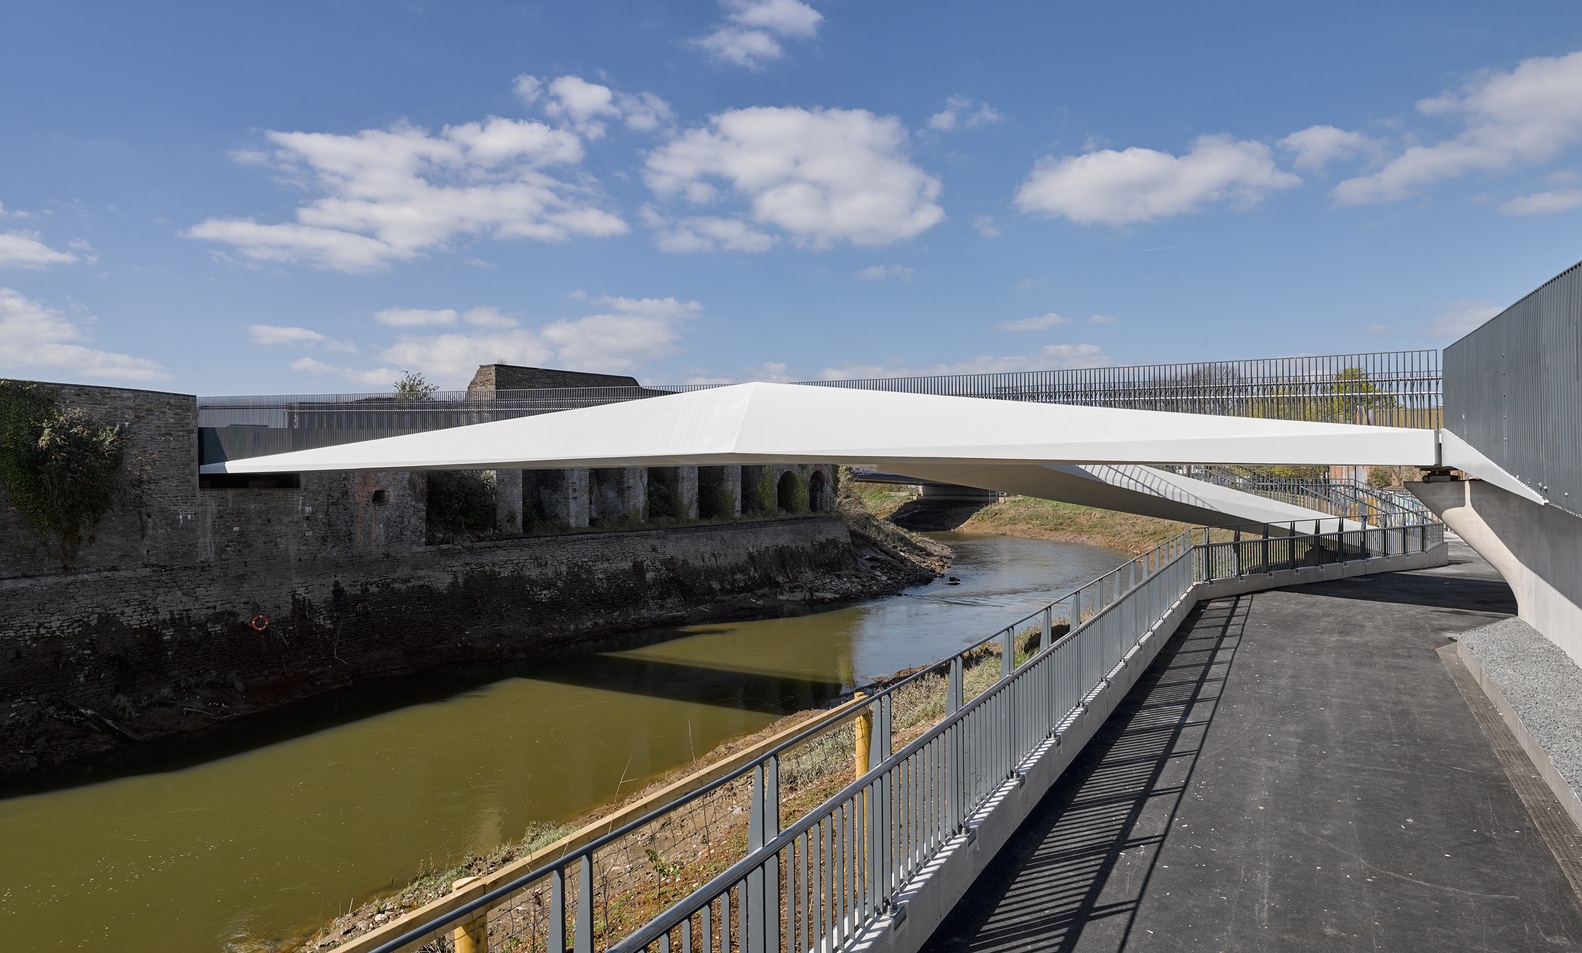 One day, a project : St. Philips Footbridge by Knights Architects